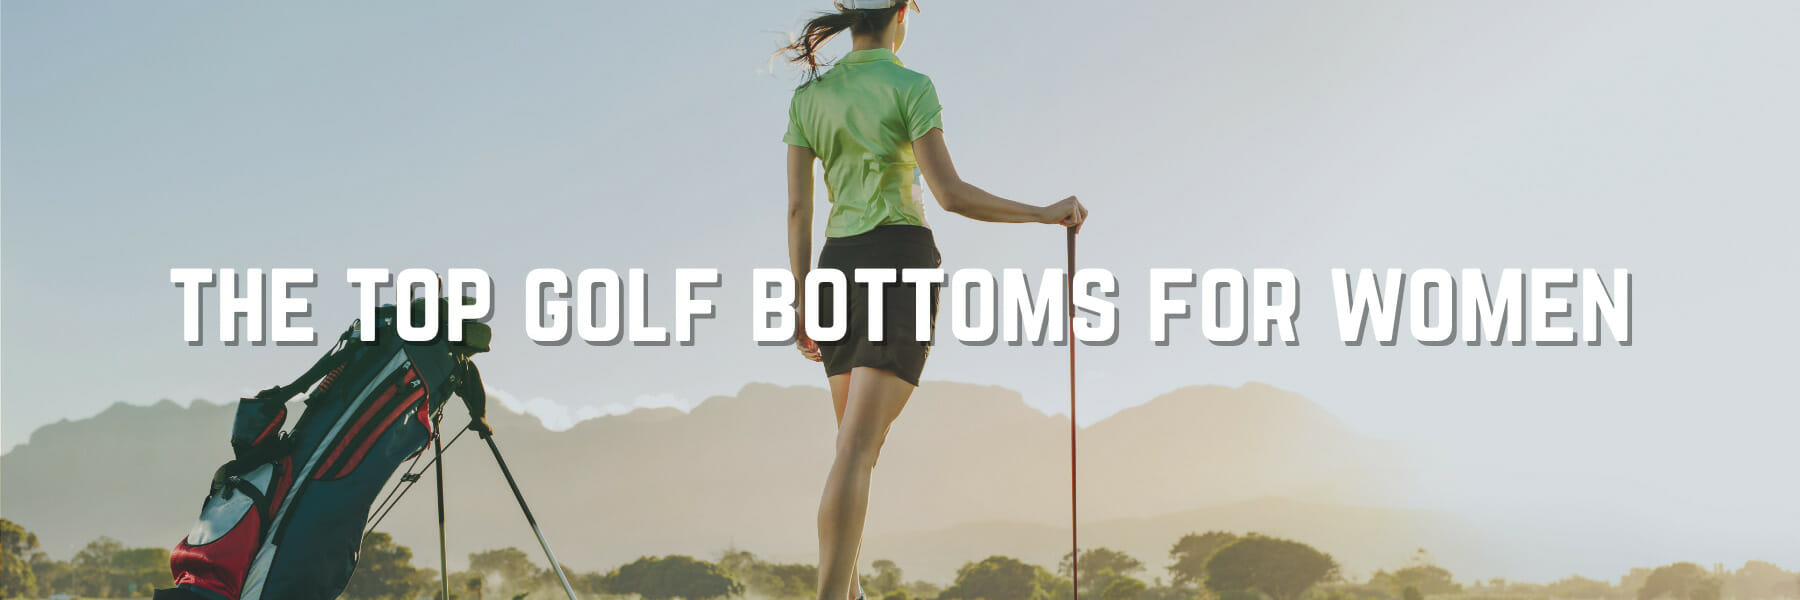 The Best Golf Bottoms For Women For On and Off The Course